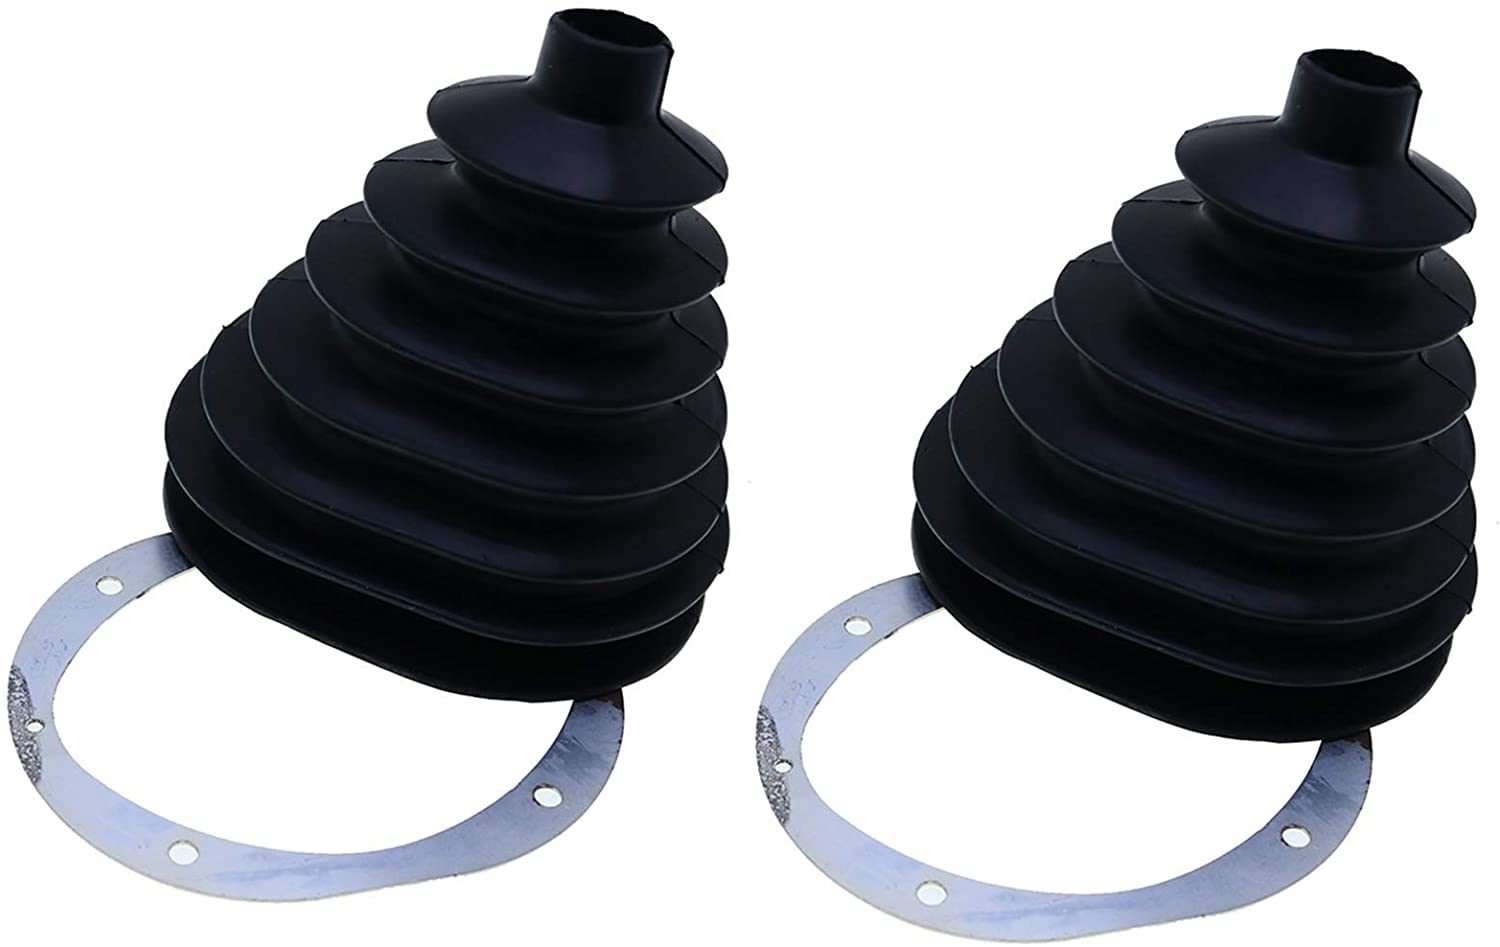 2PCS Rubber Steering Boot Arm 6532127 Compatible with Bobcat 325 328 331 334 337 341 520 530 730 731 732 751 753 763 773 S160 S175 S185 S205 S330 T110 T140 T180 T190 T200 T250 T300 T320 - KUDUPARTS